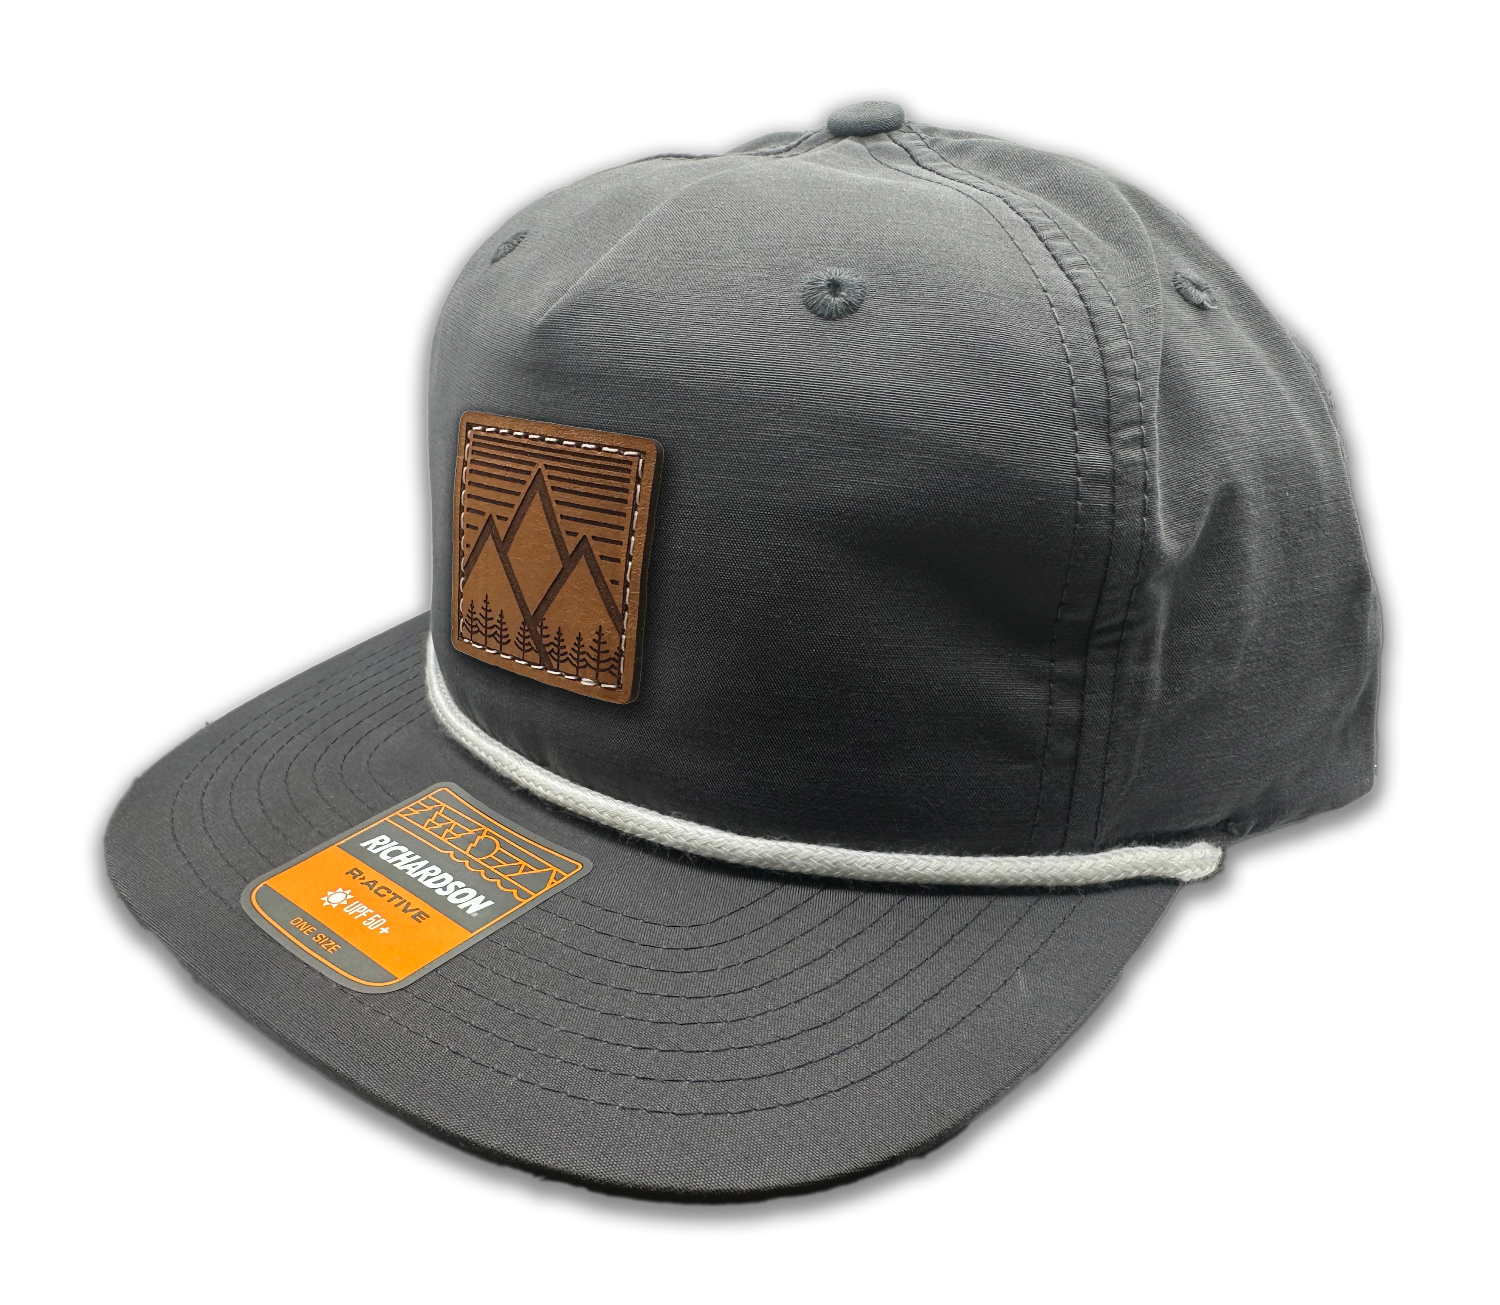 Charcoal Richardson 256 Rope Umpqua Hat with flatbill and lightweight material. Low profile SnapBack cap perfect for outdoor adventures. Features real leather patch with mountain west design for rugged charm.